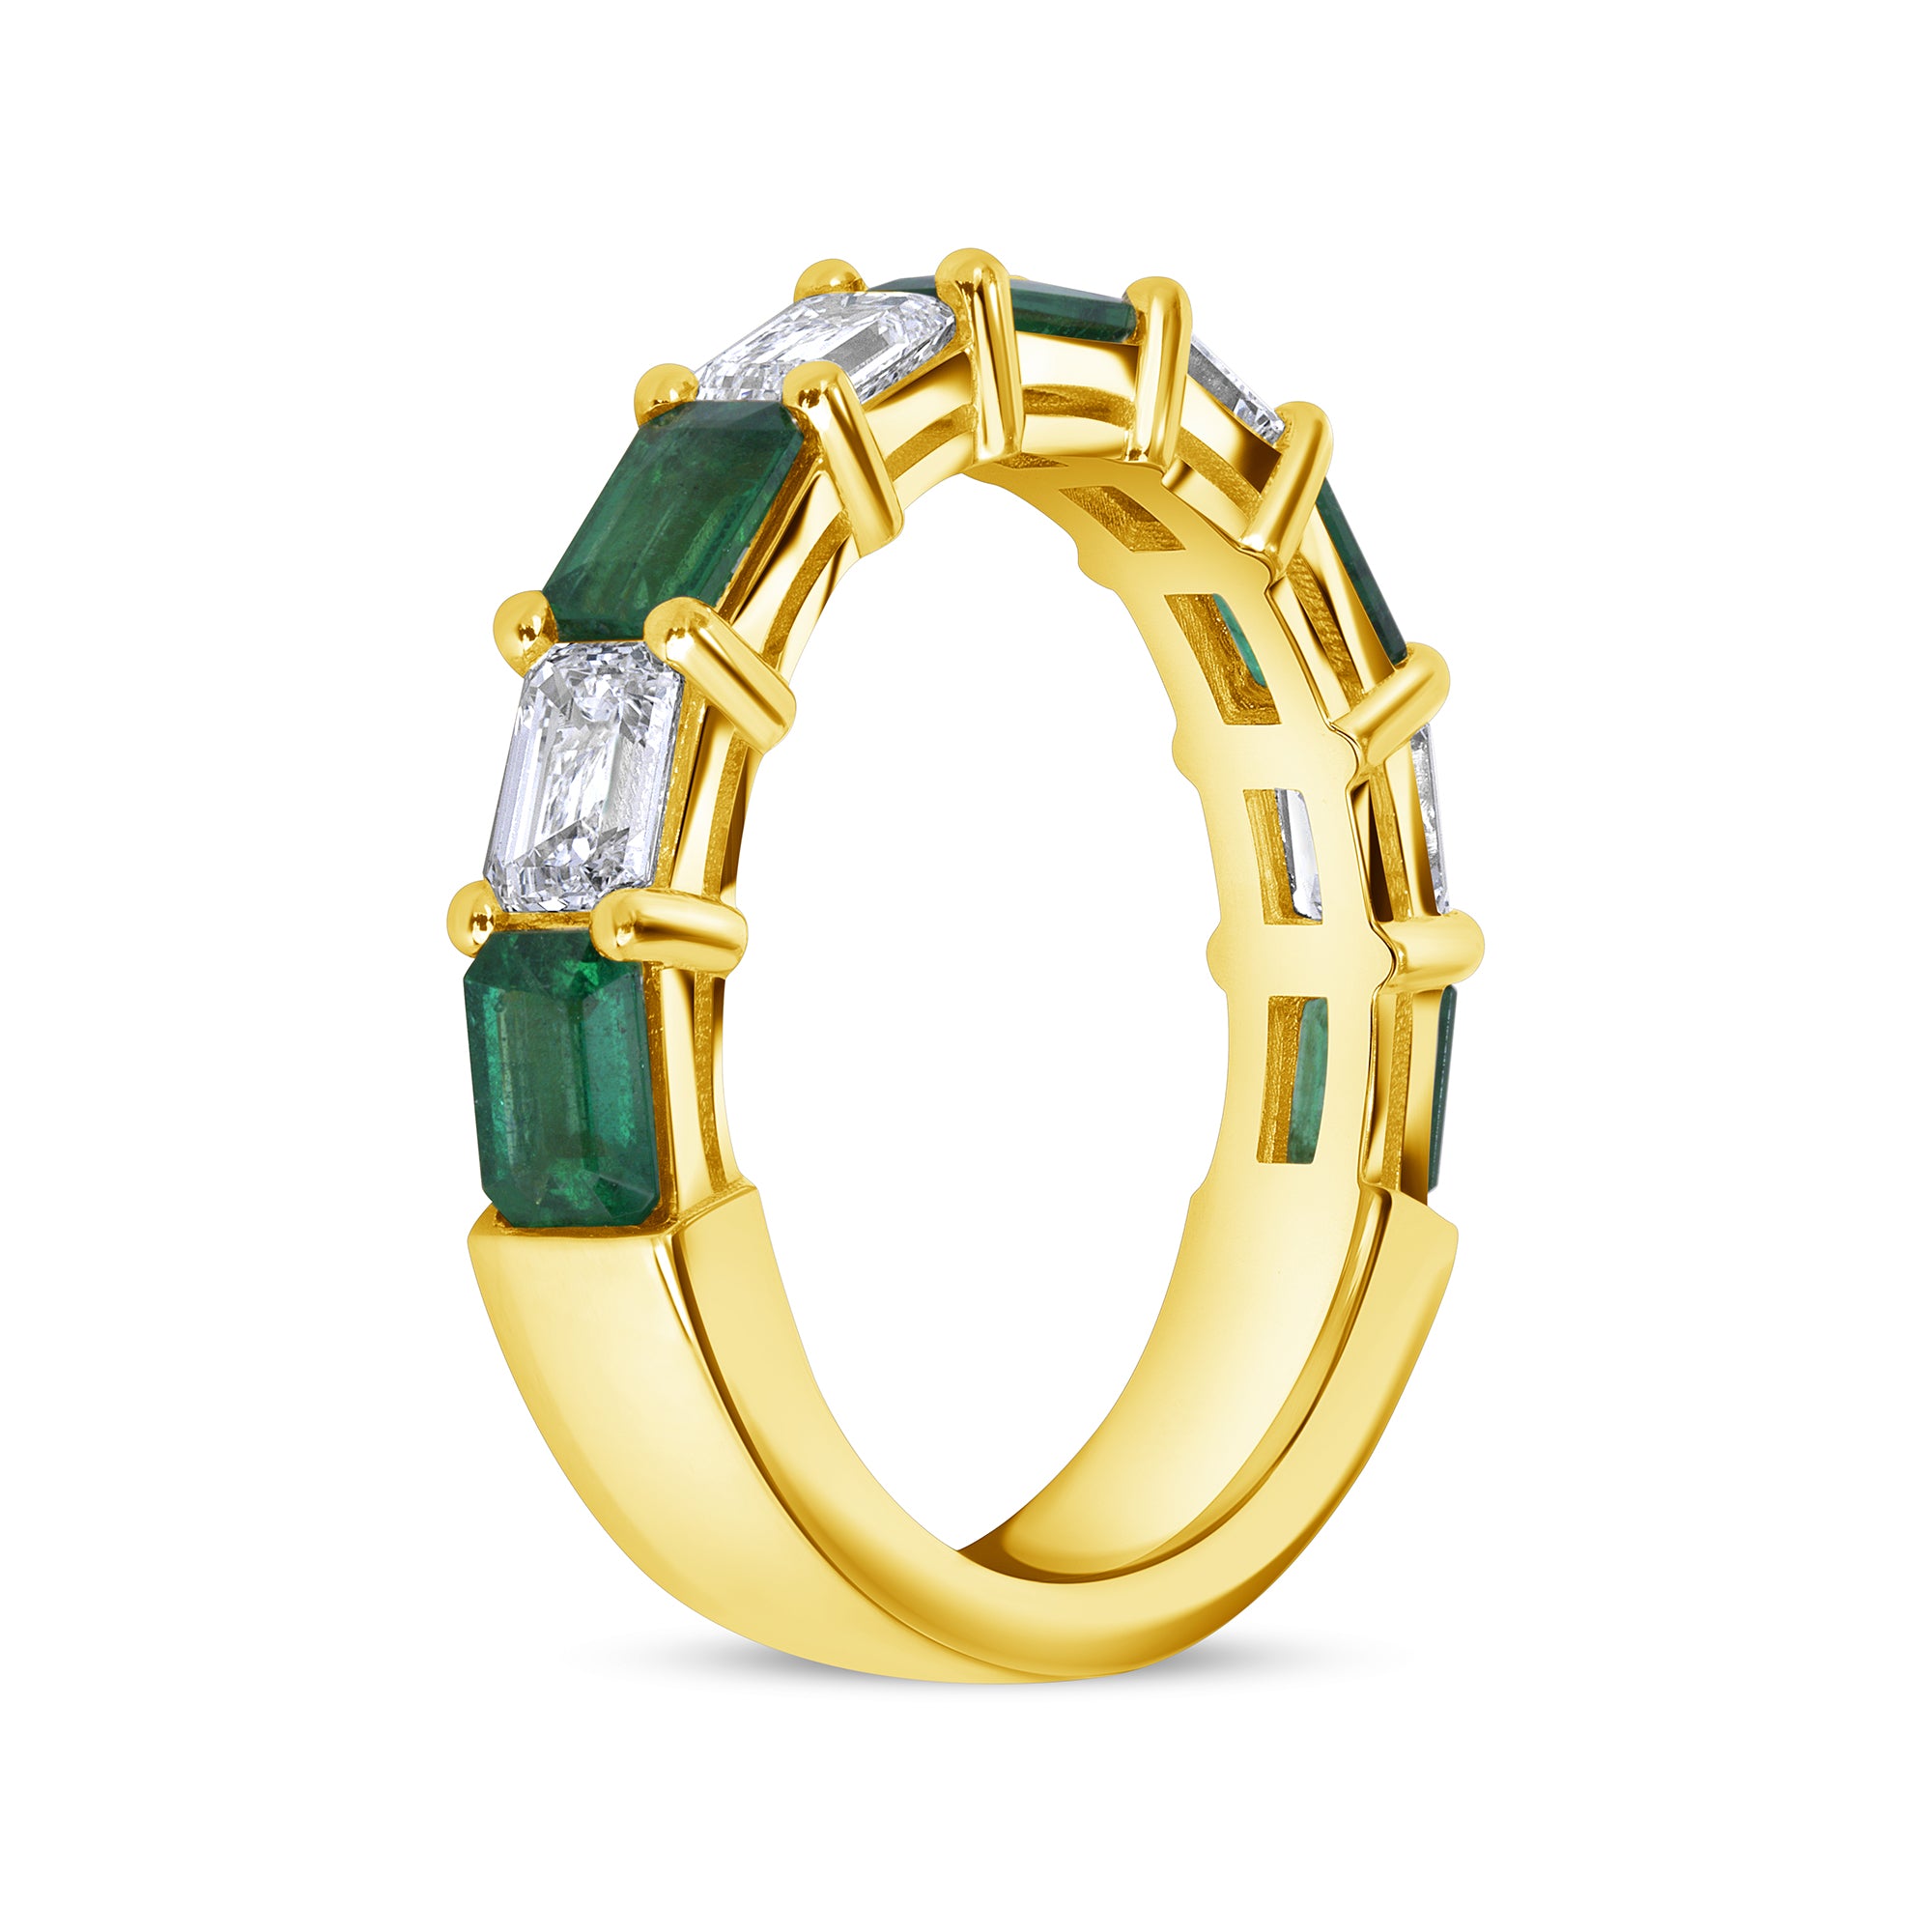 East-West Set Emerald Cut Diamond And Green Emerald Band Going 3/4 Way Around In 18 Karat Yellow Gold